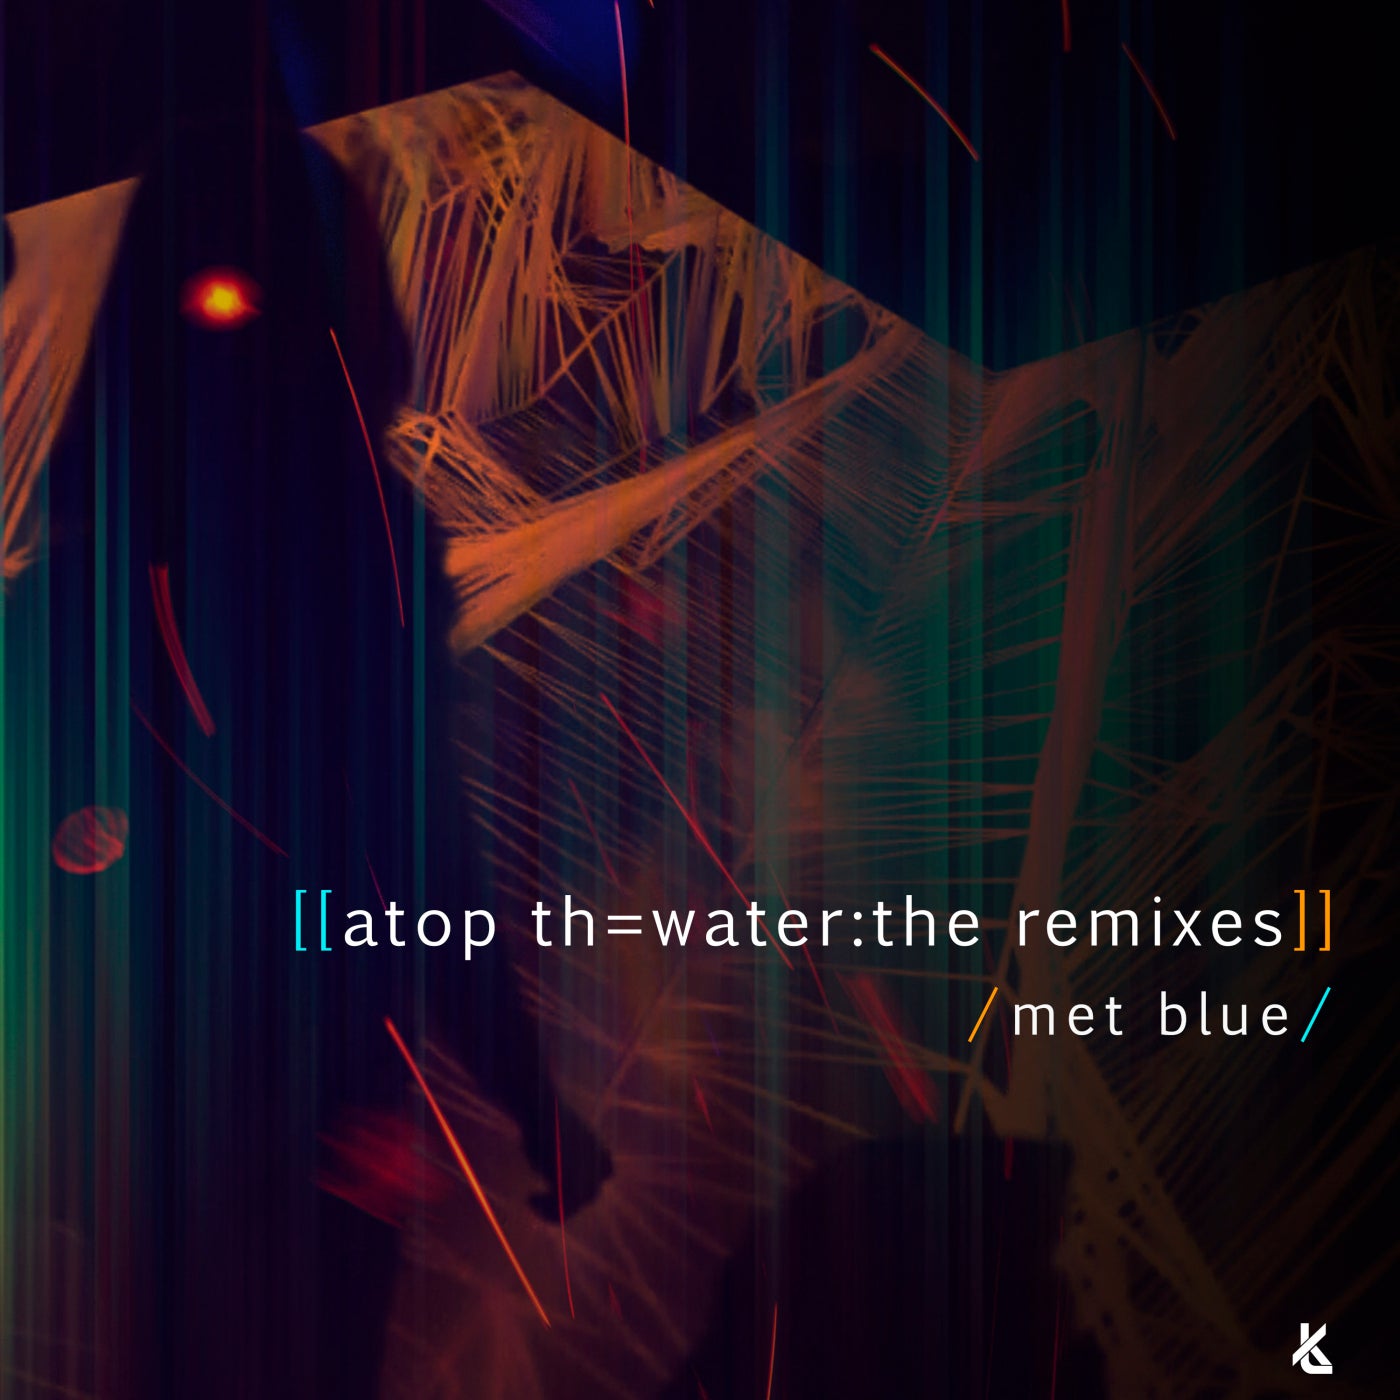 Atop Th= Water: The Remixes